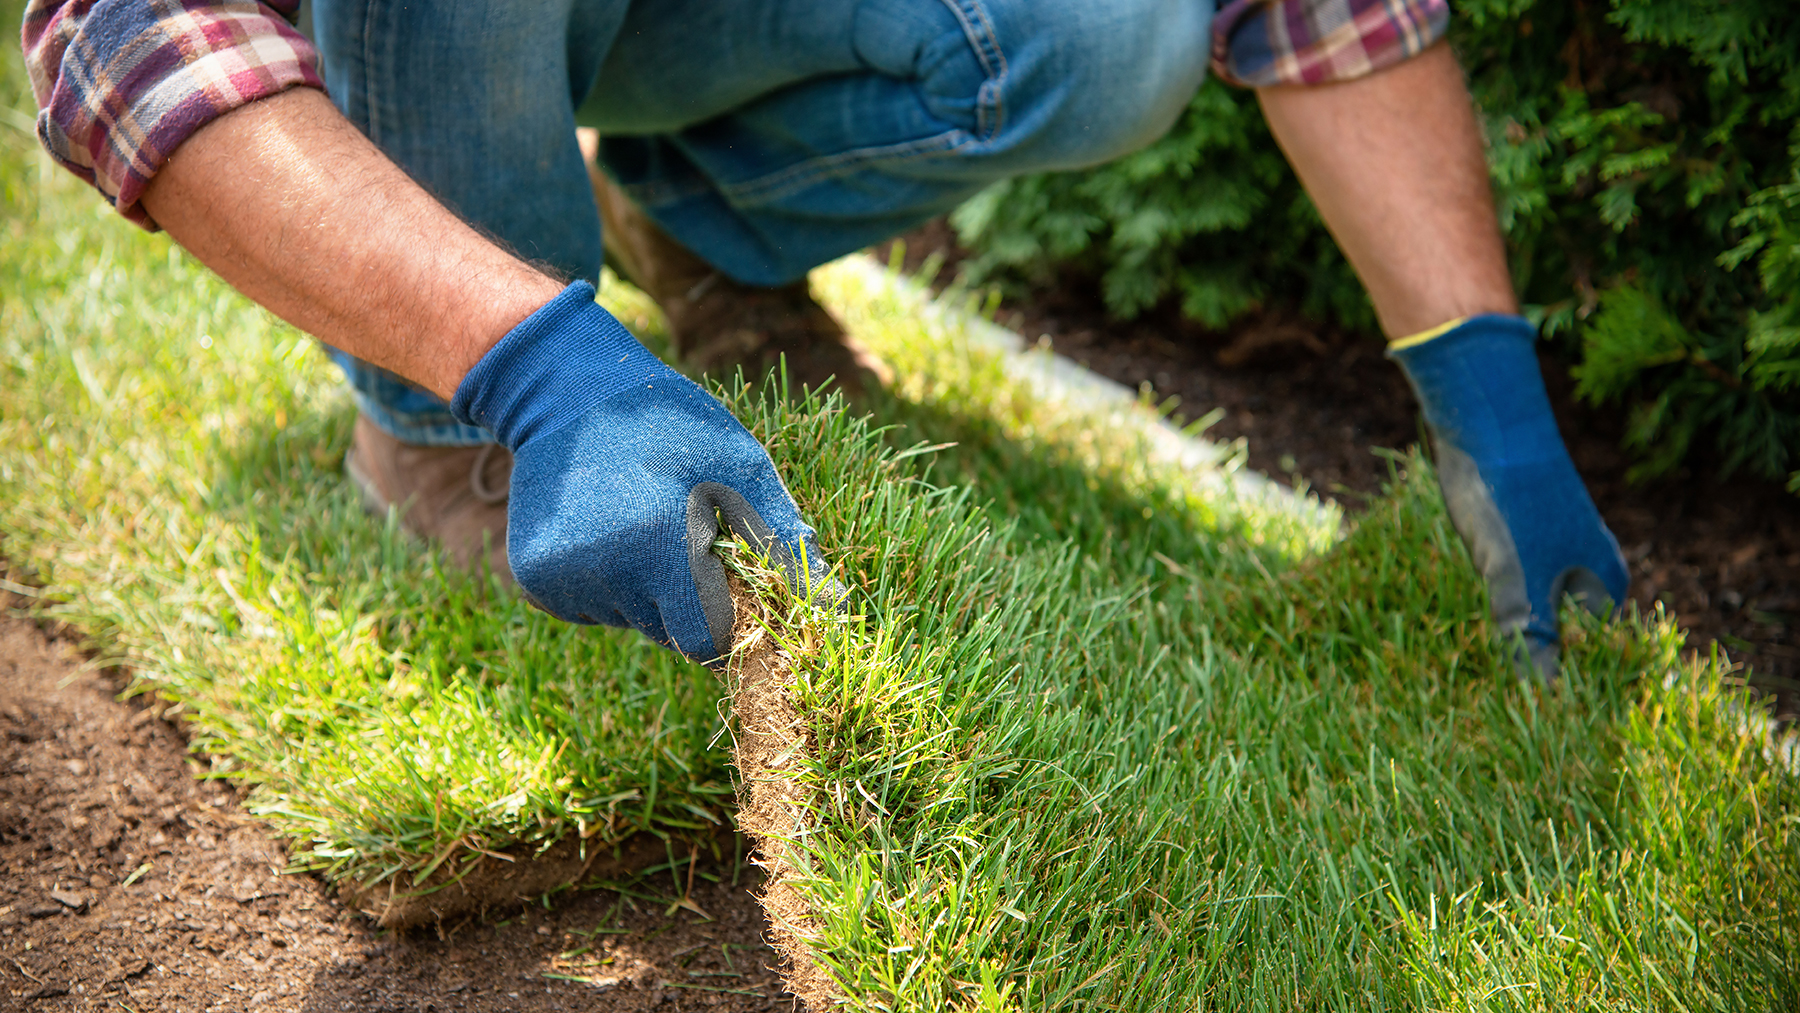 Man laying new turf in a garden